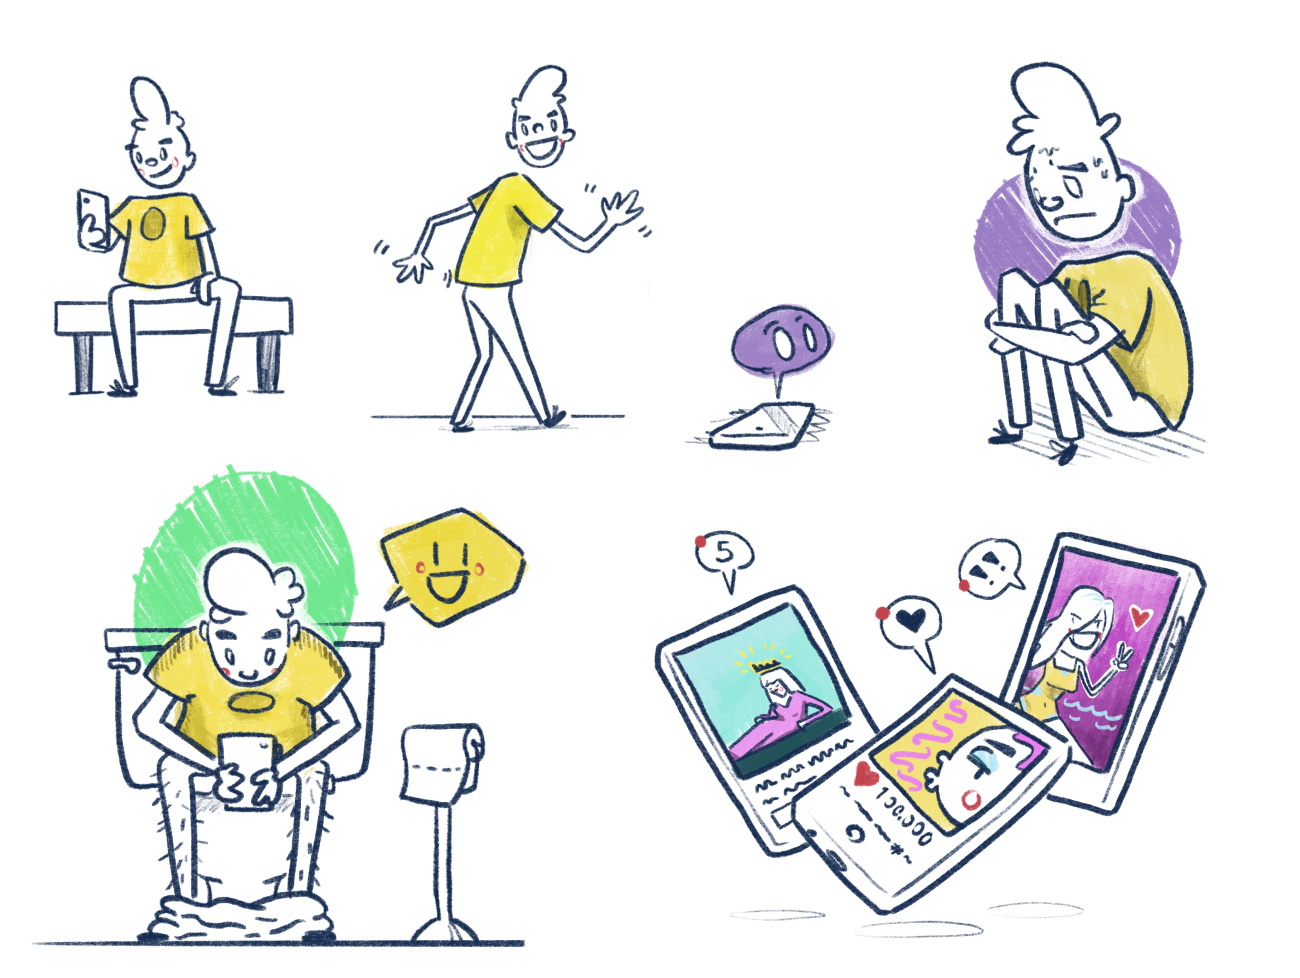 a character with a yellow shirt in various poses, sitting on a bench or a toilet, dancing, sitting next to their phone, and phones with social media images